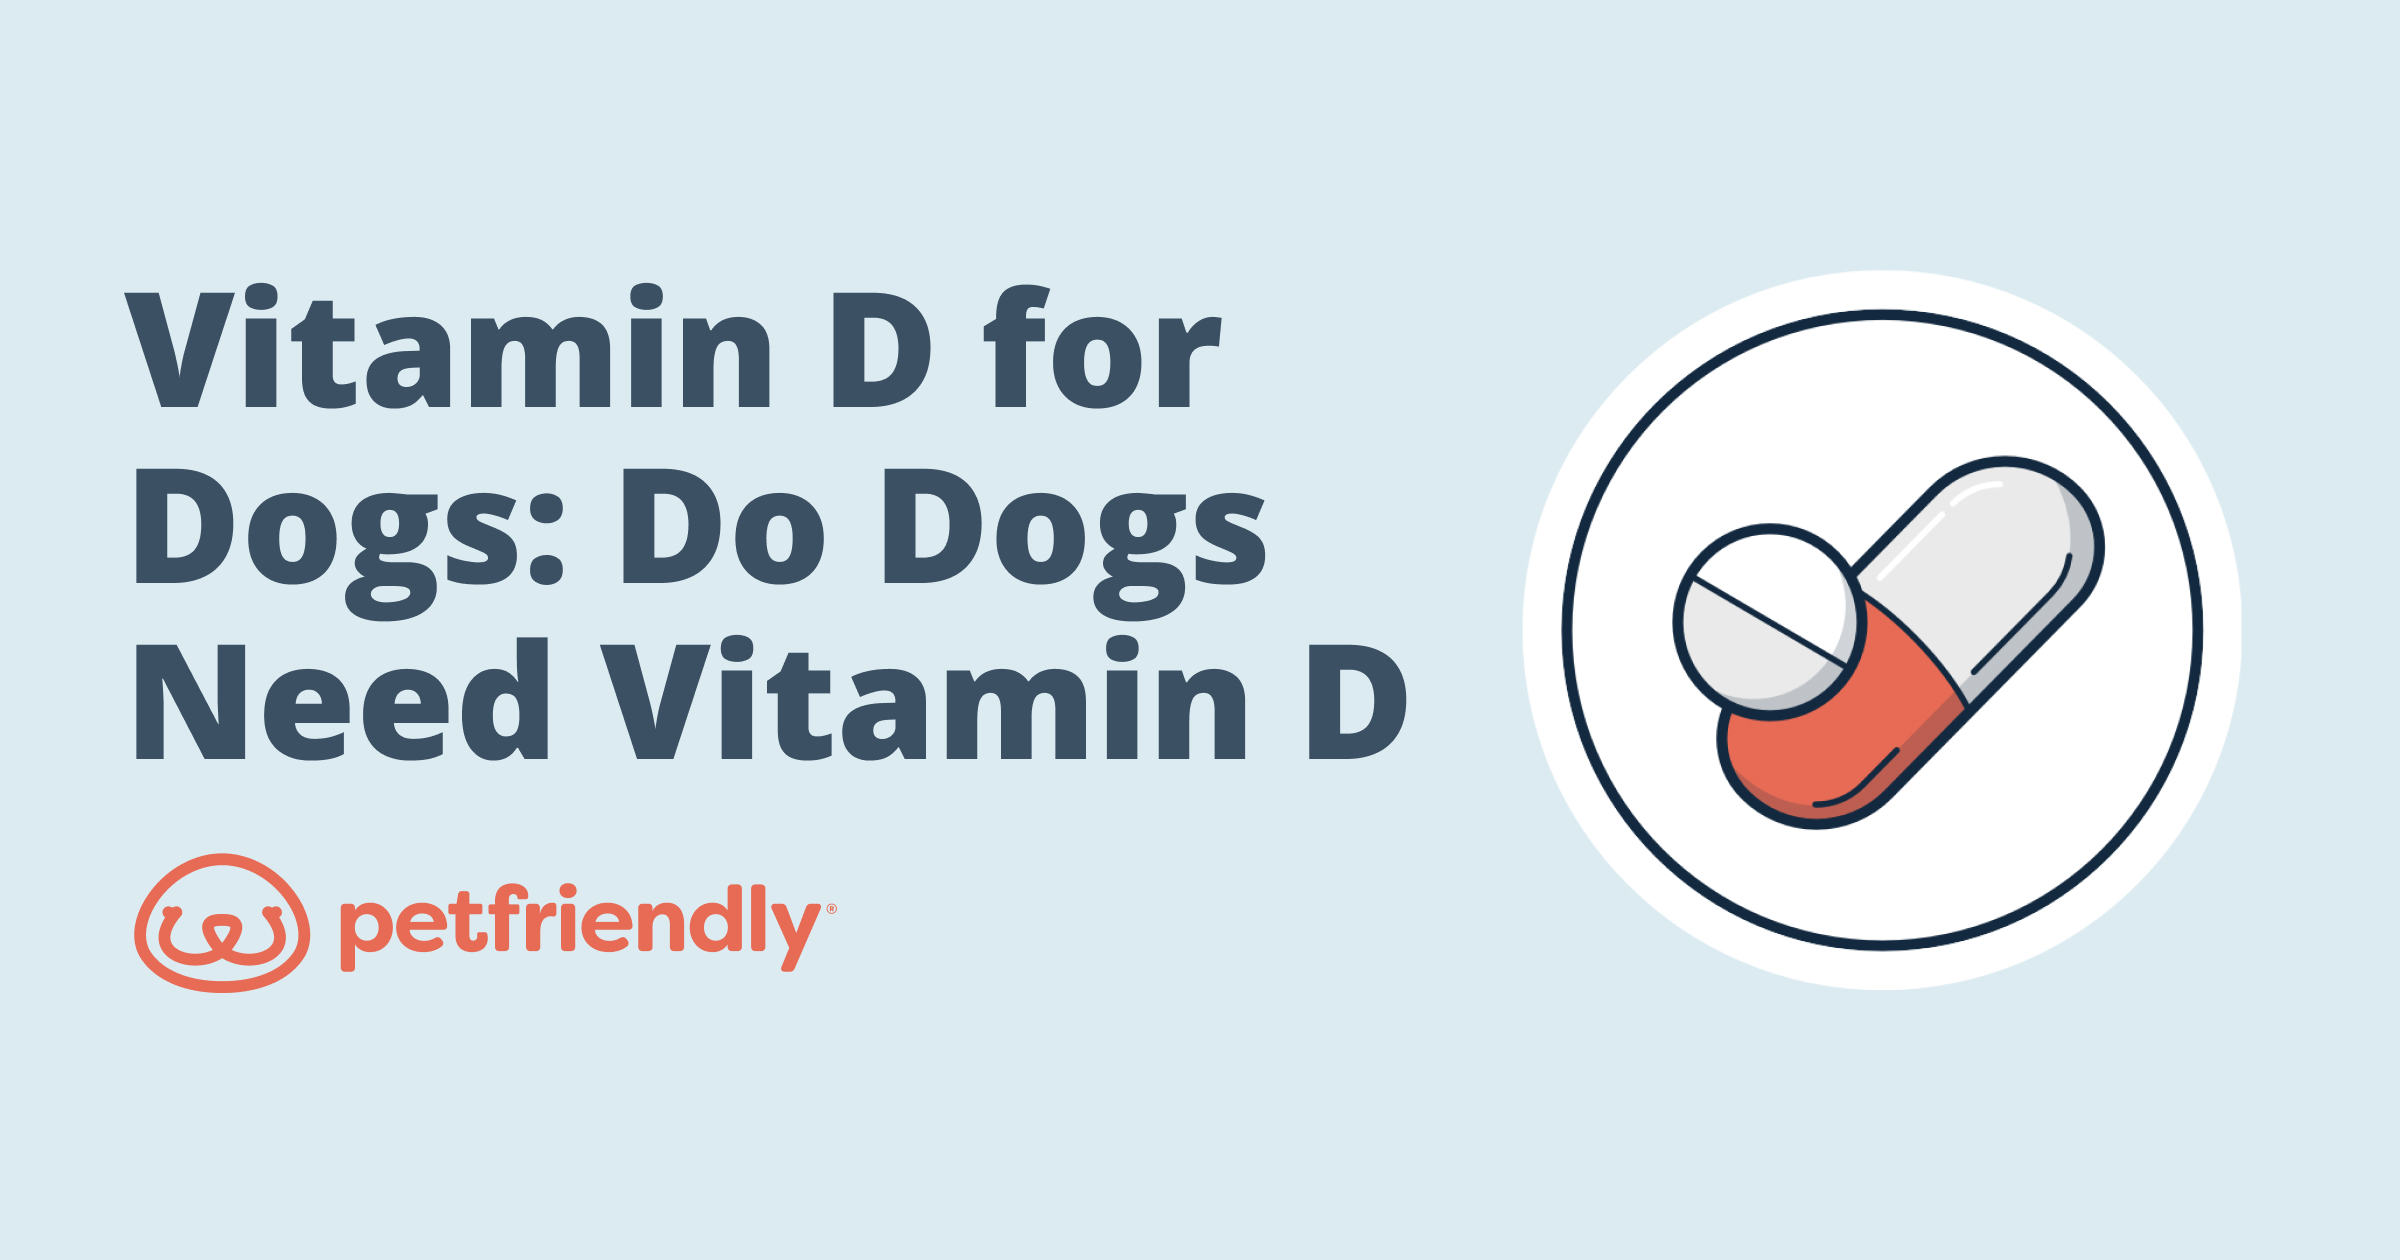 Vitamin D for Dogs: Do Dogs Need Vitamin D